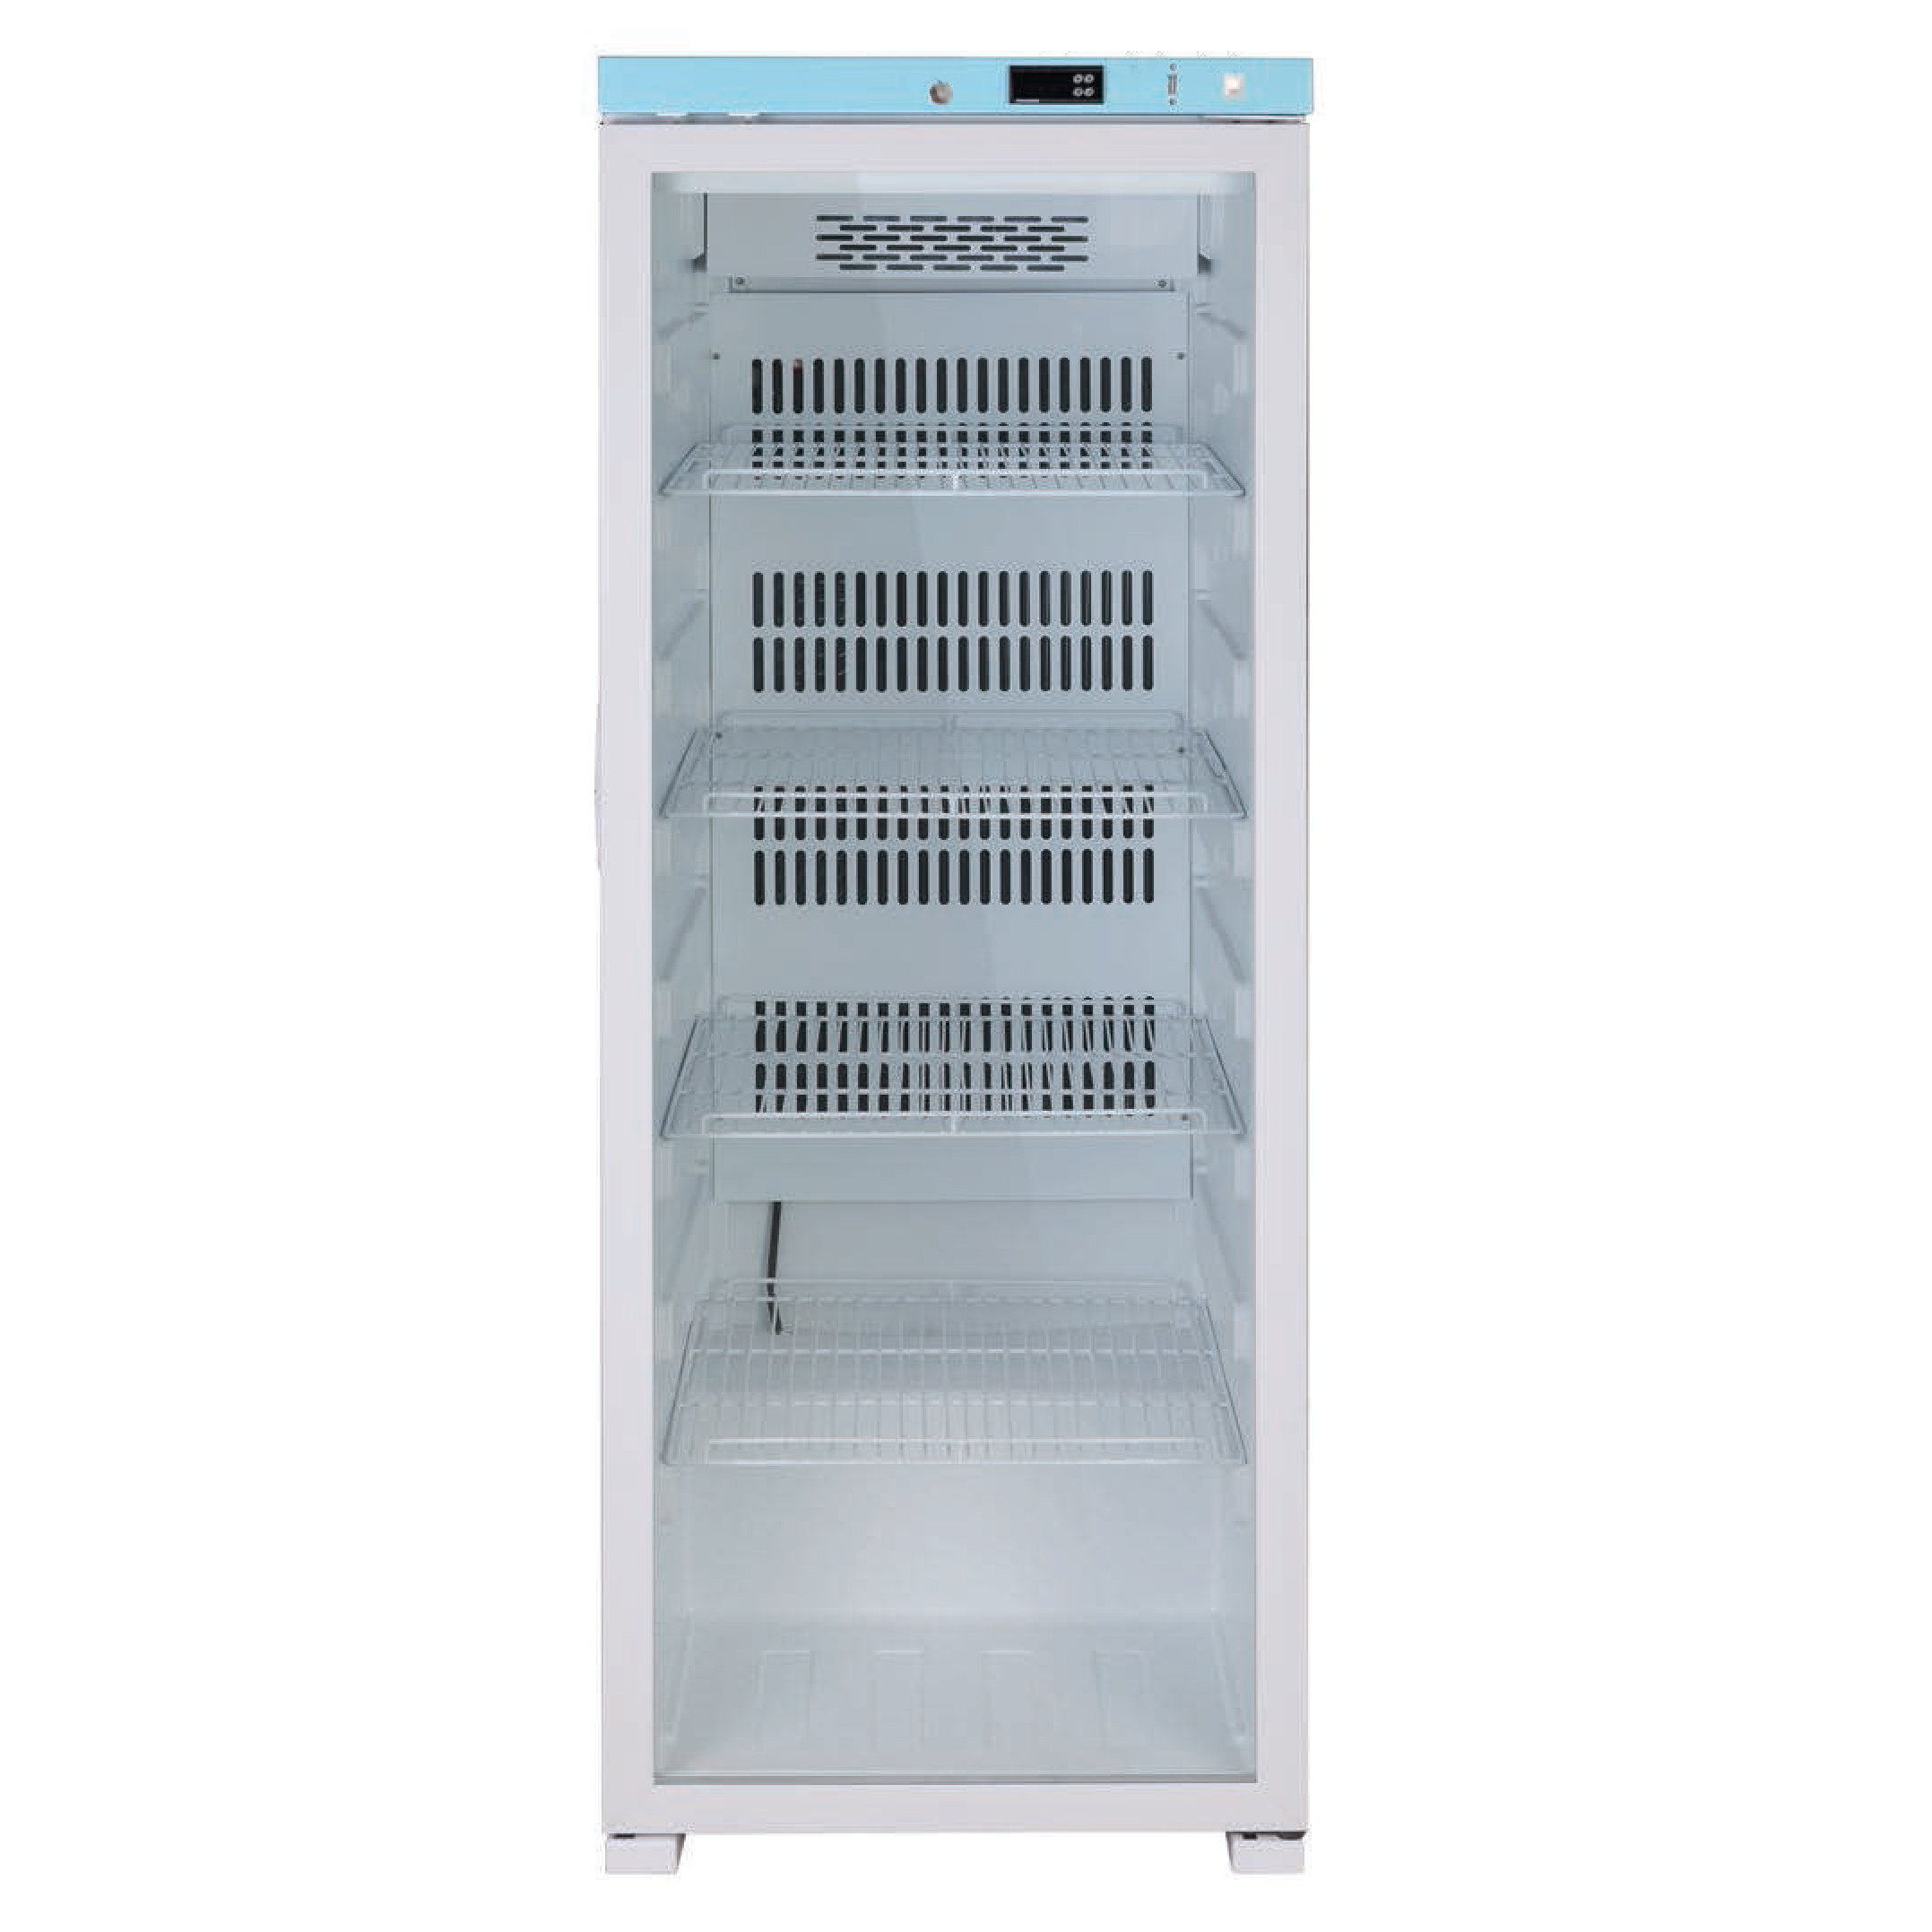 Keep Medicines Safely Chilled with the Commercial Pharmaceutical Refrigerator